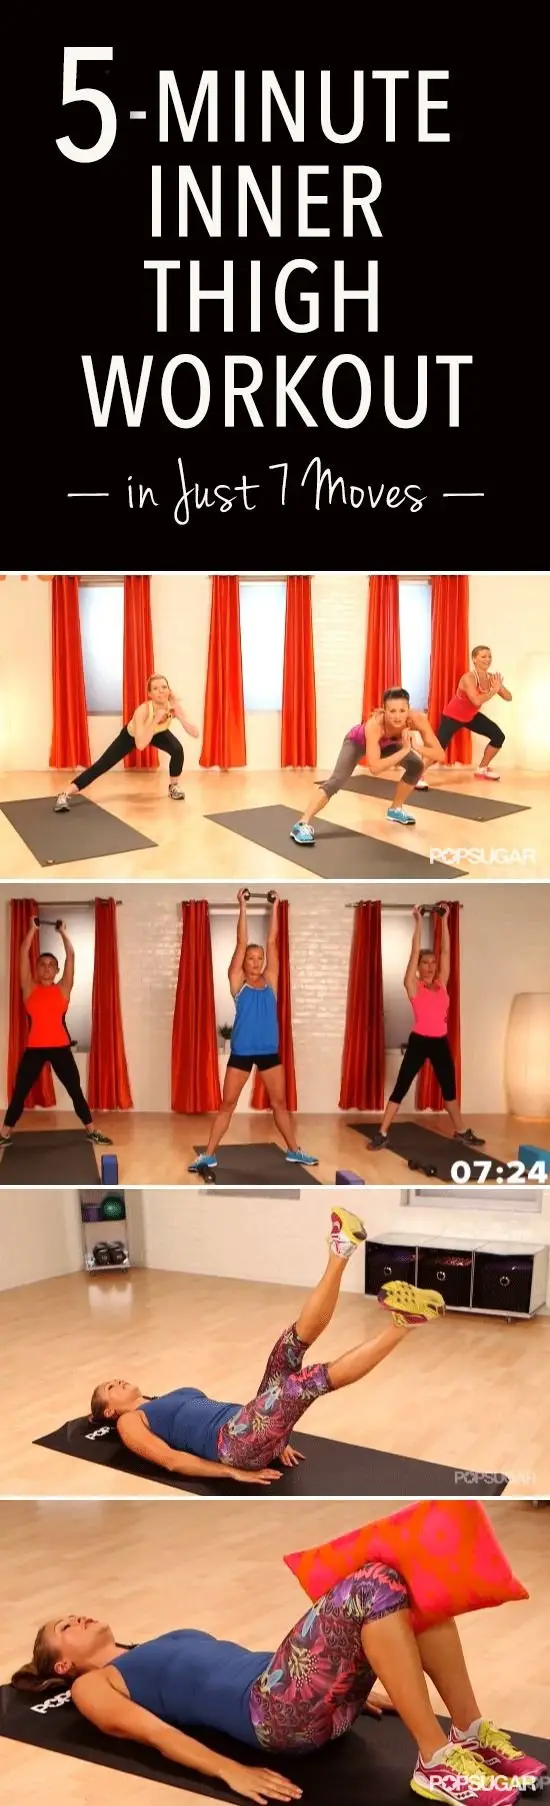 ⏰Short on Time YOGA SCULPT  15 Min Yoga with Light Weights 